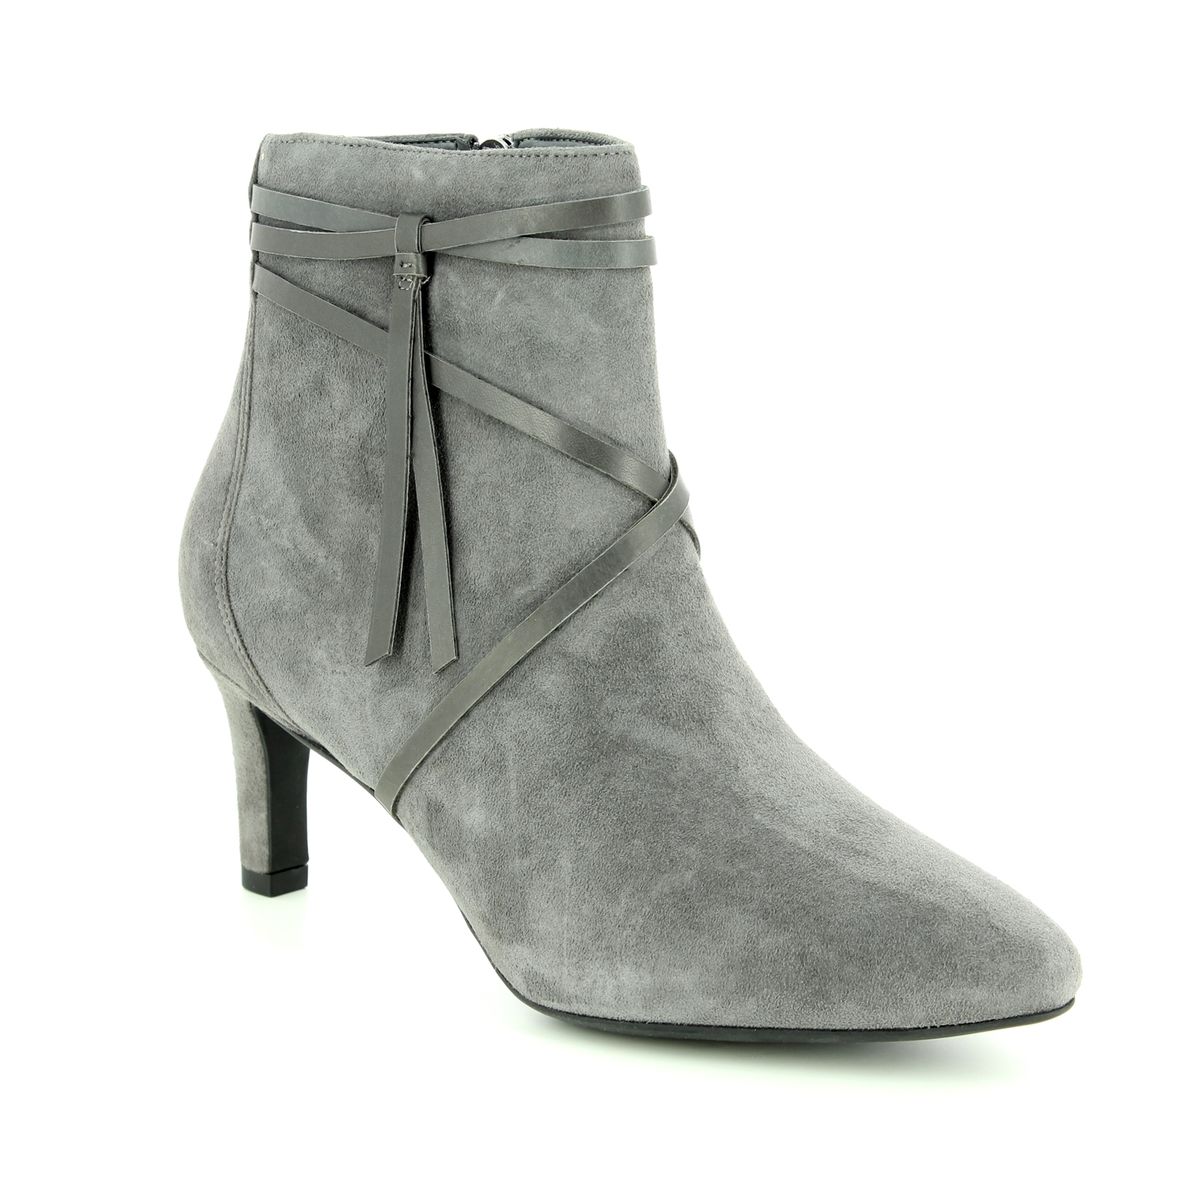 Clarks Calla Aster D Fit Grey suede 